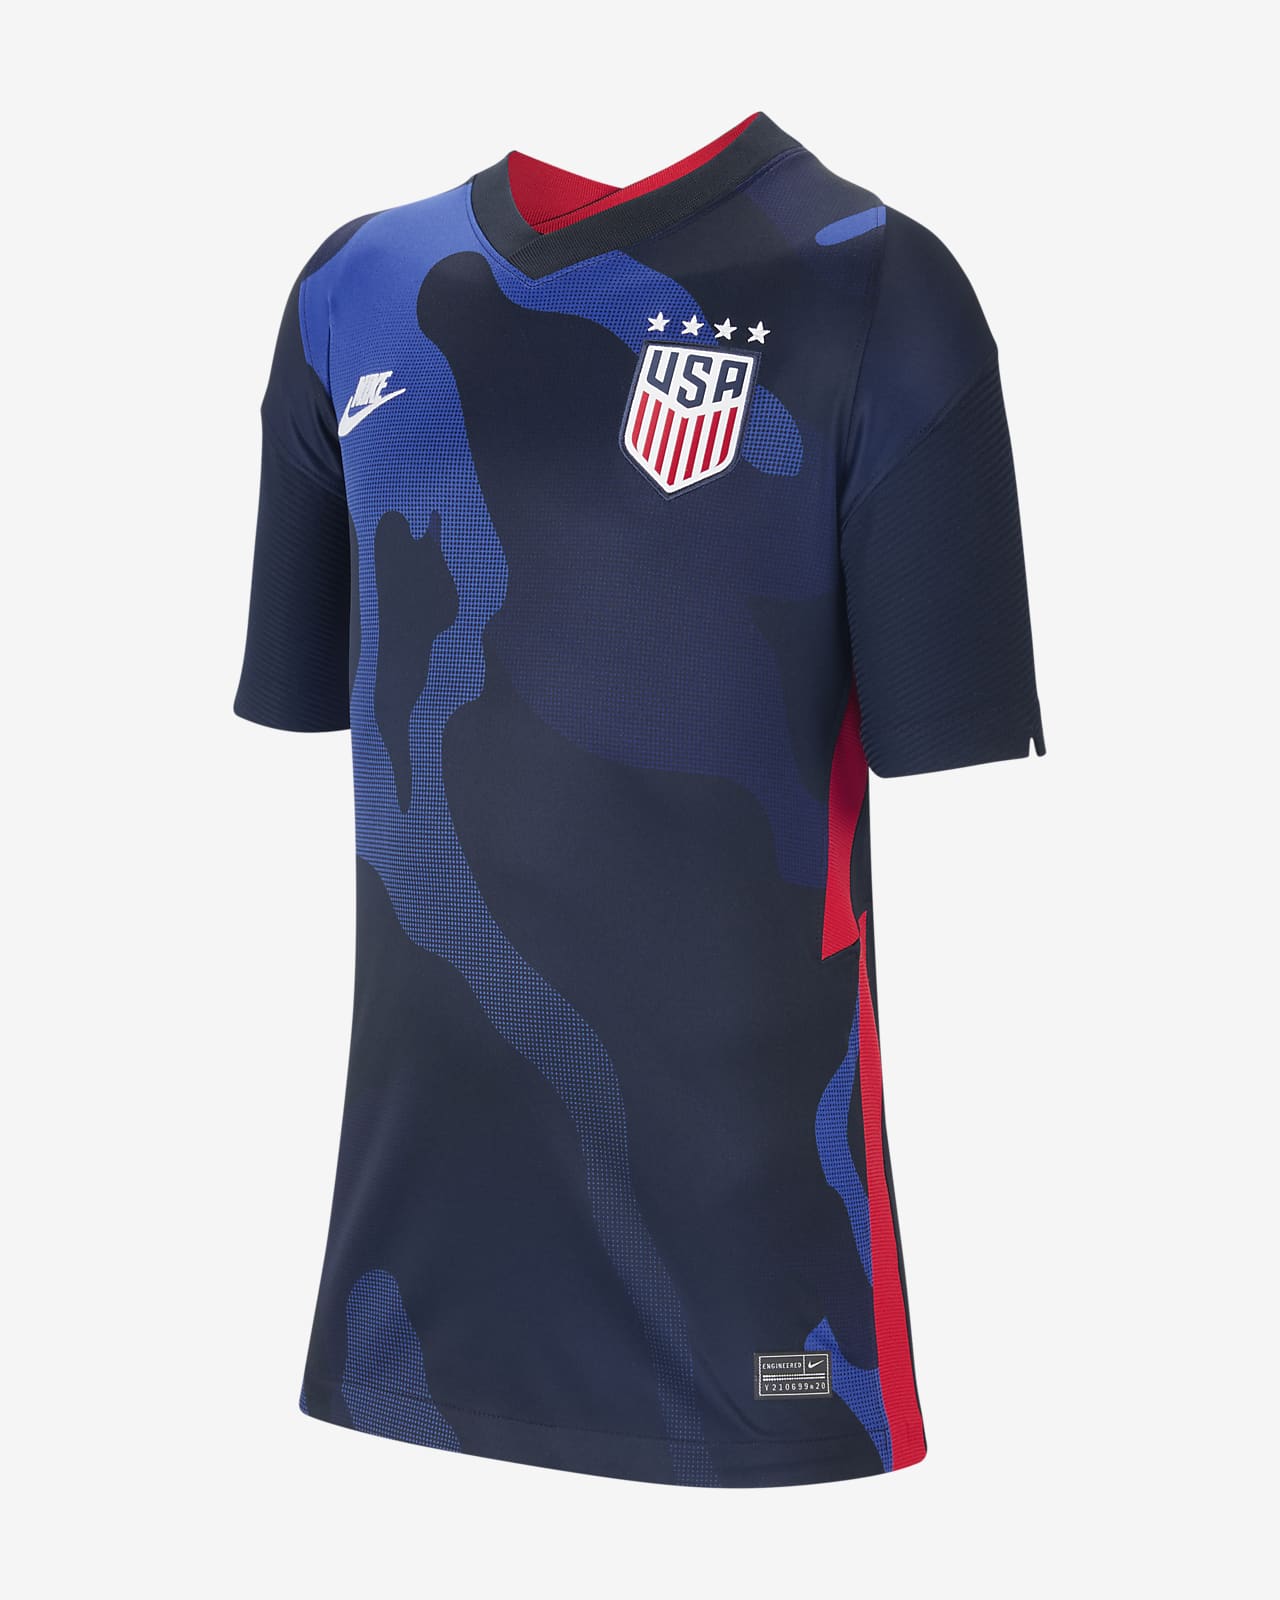 us youth soccer jersey